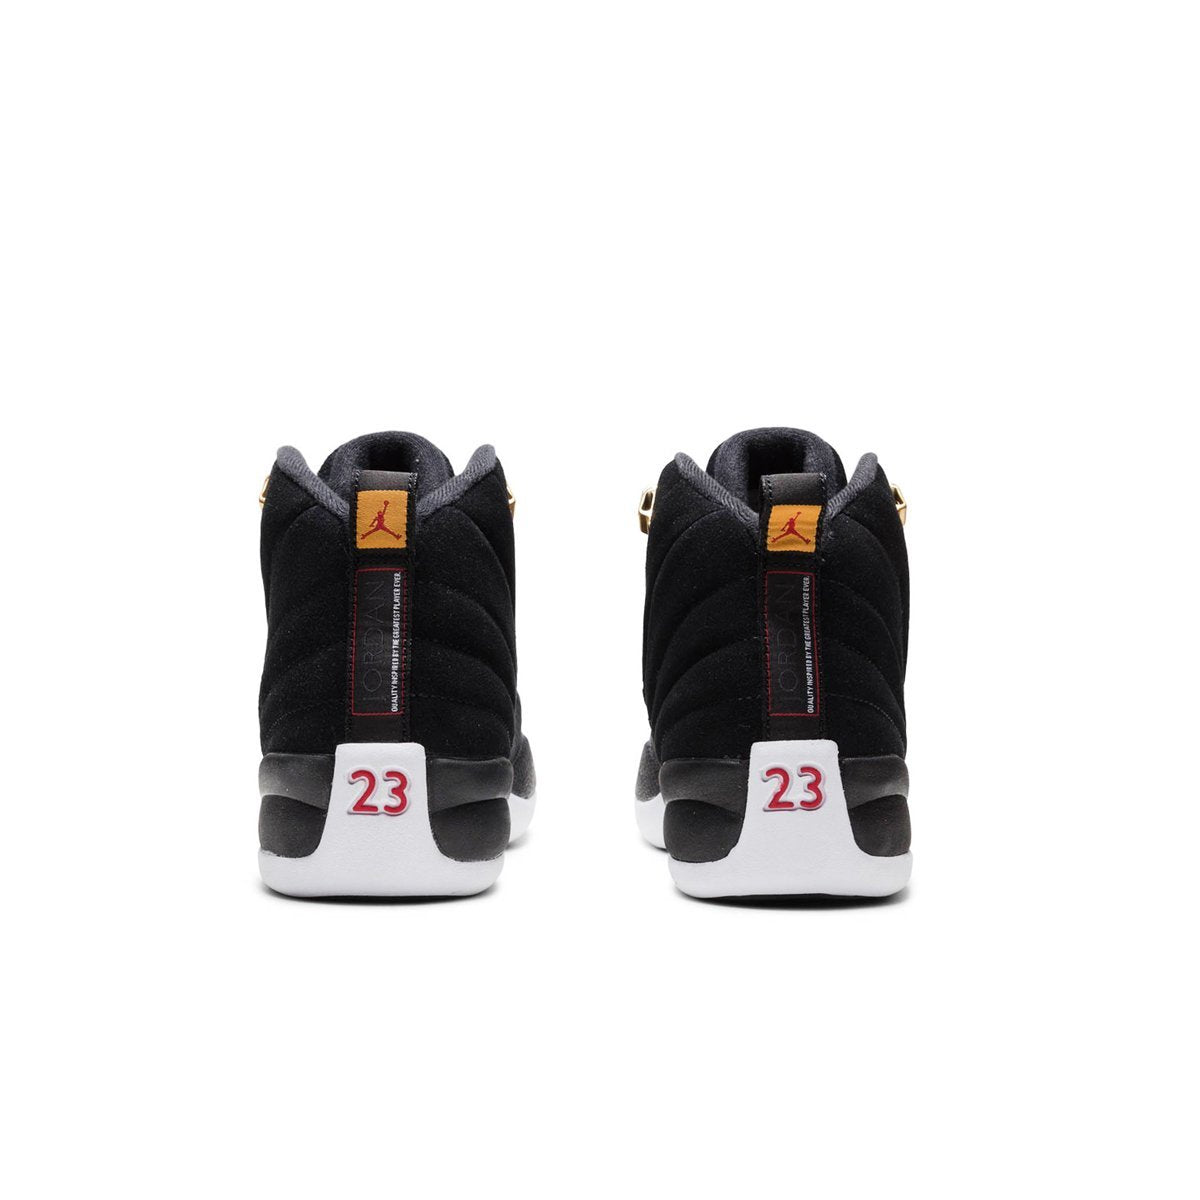 jordan shoes with 23 on the back